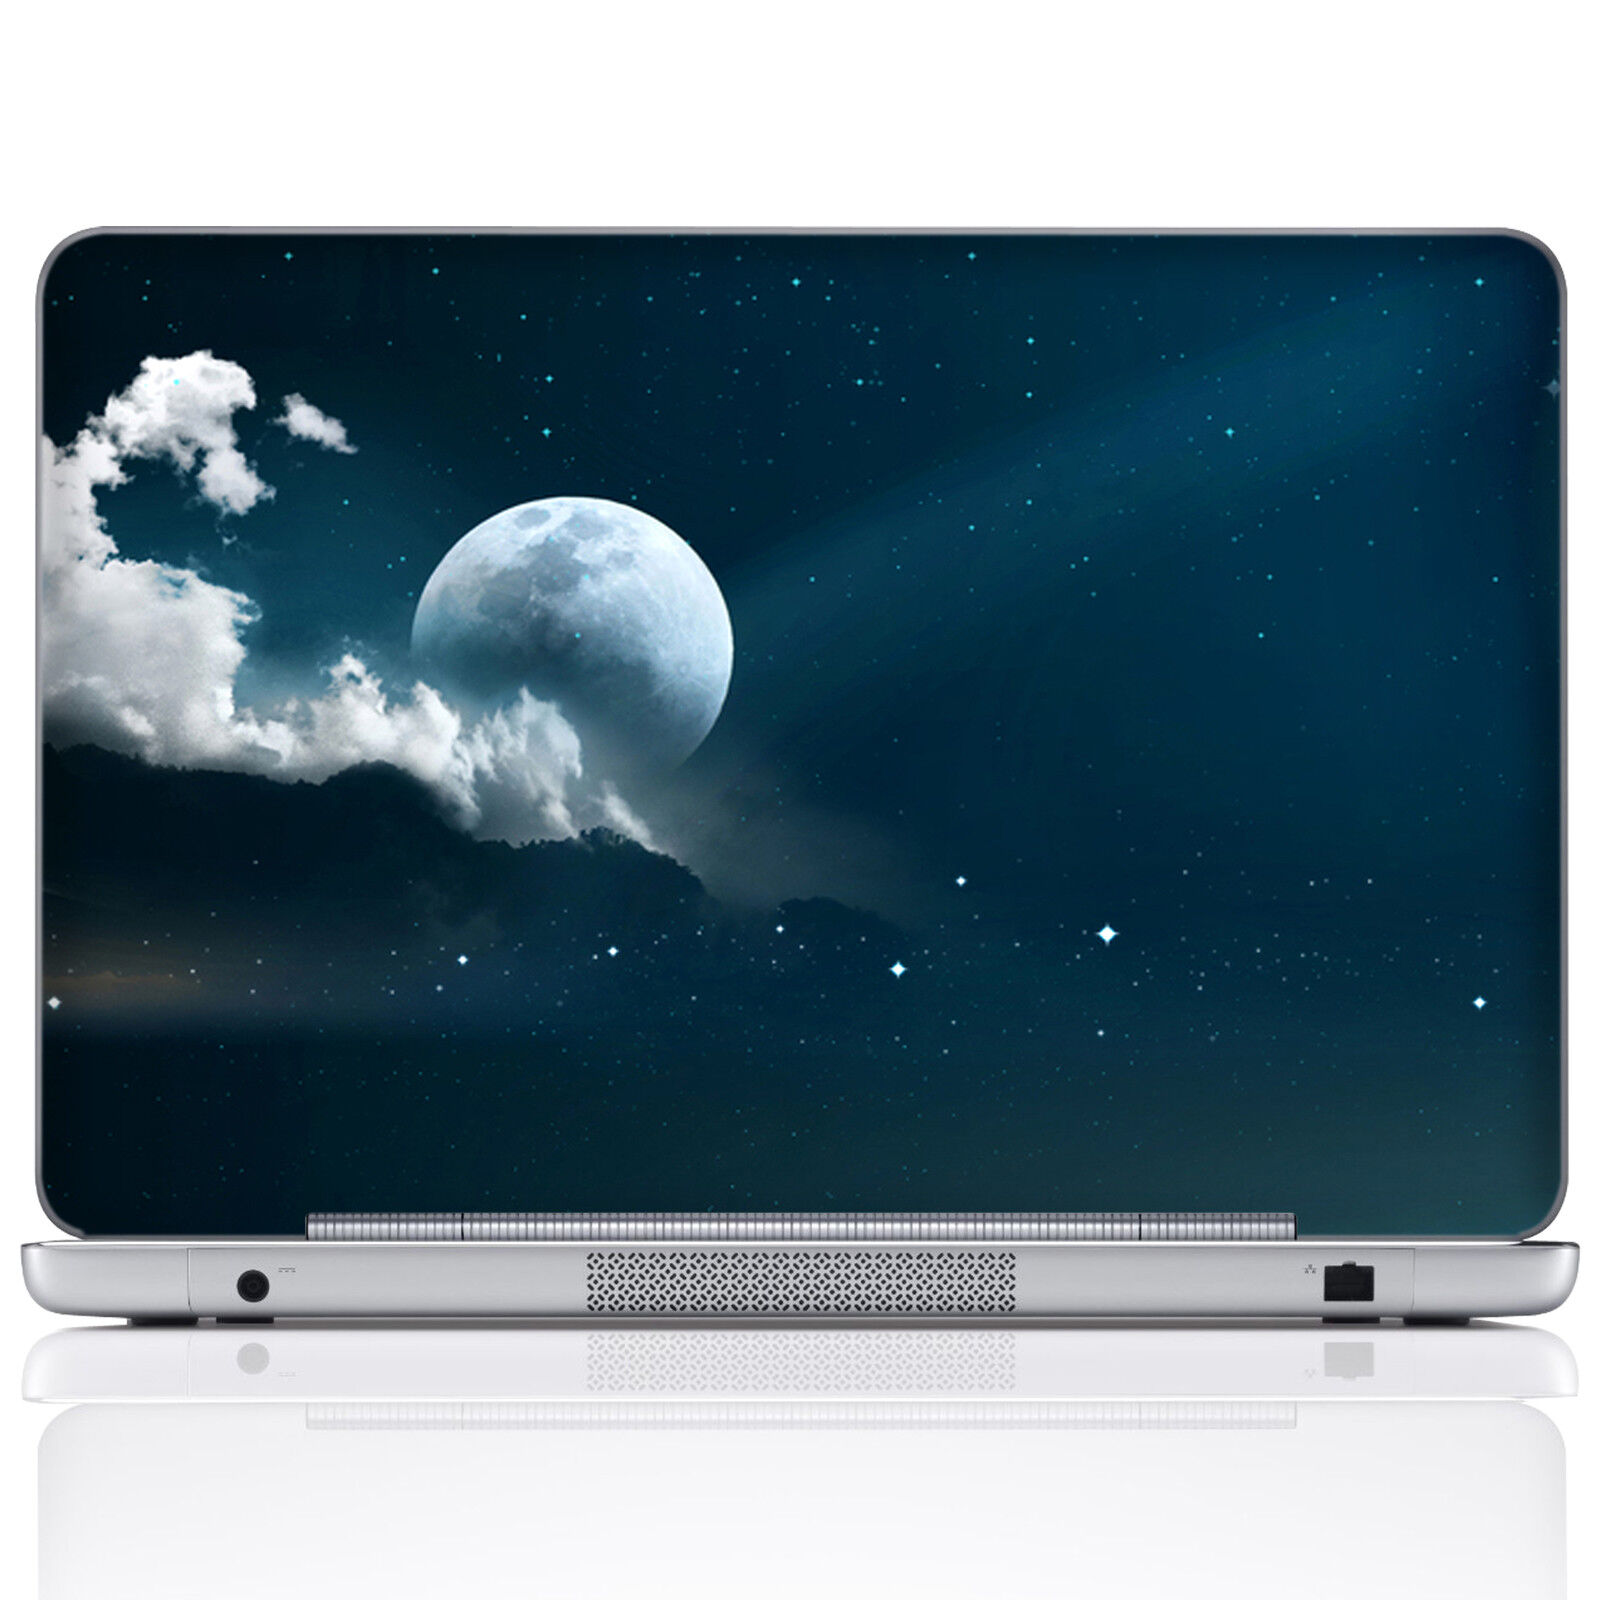 17 17.3 Inch High Quality Vinyl Laptop Computer Skin Sticker Decal Cover  507